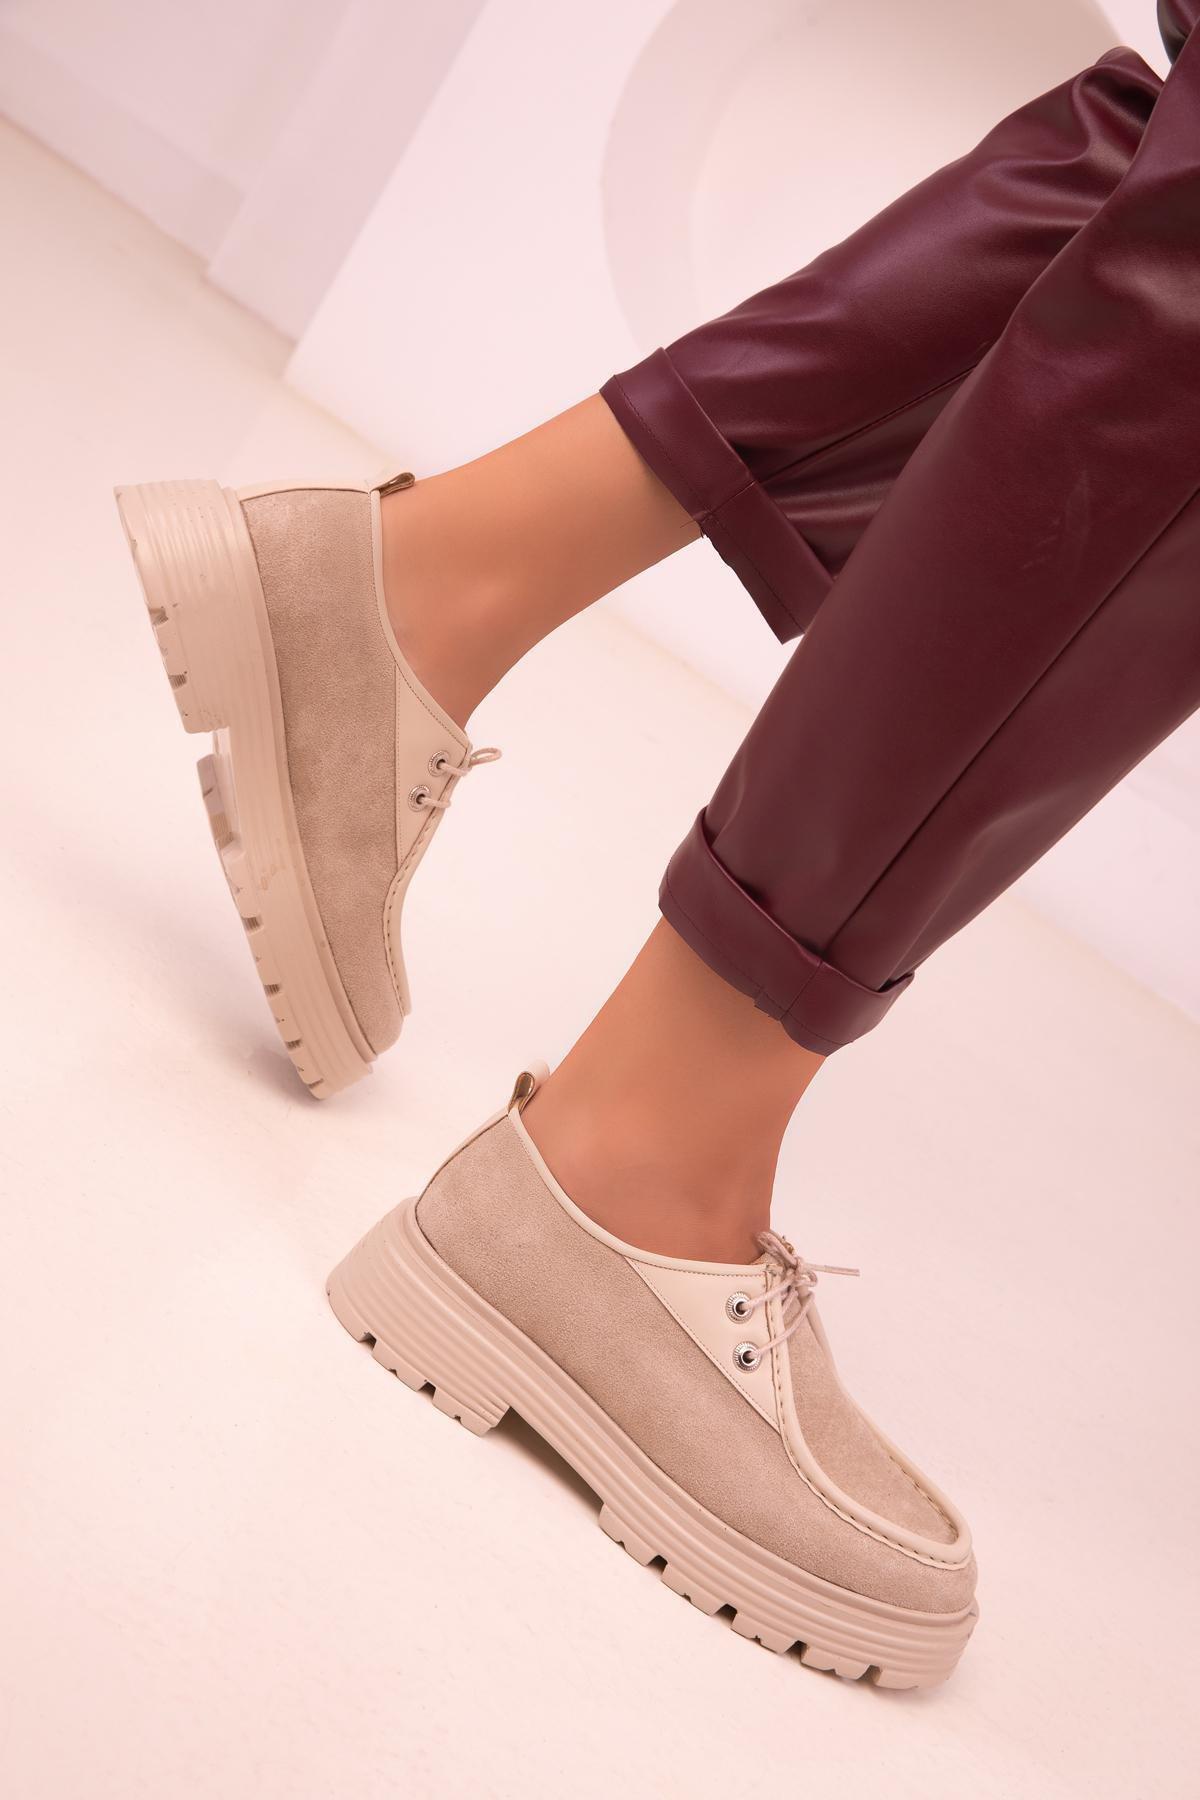 SOHO - Beige Lace-Up Suede Casual Shoes